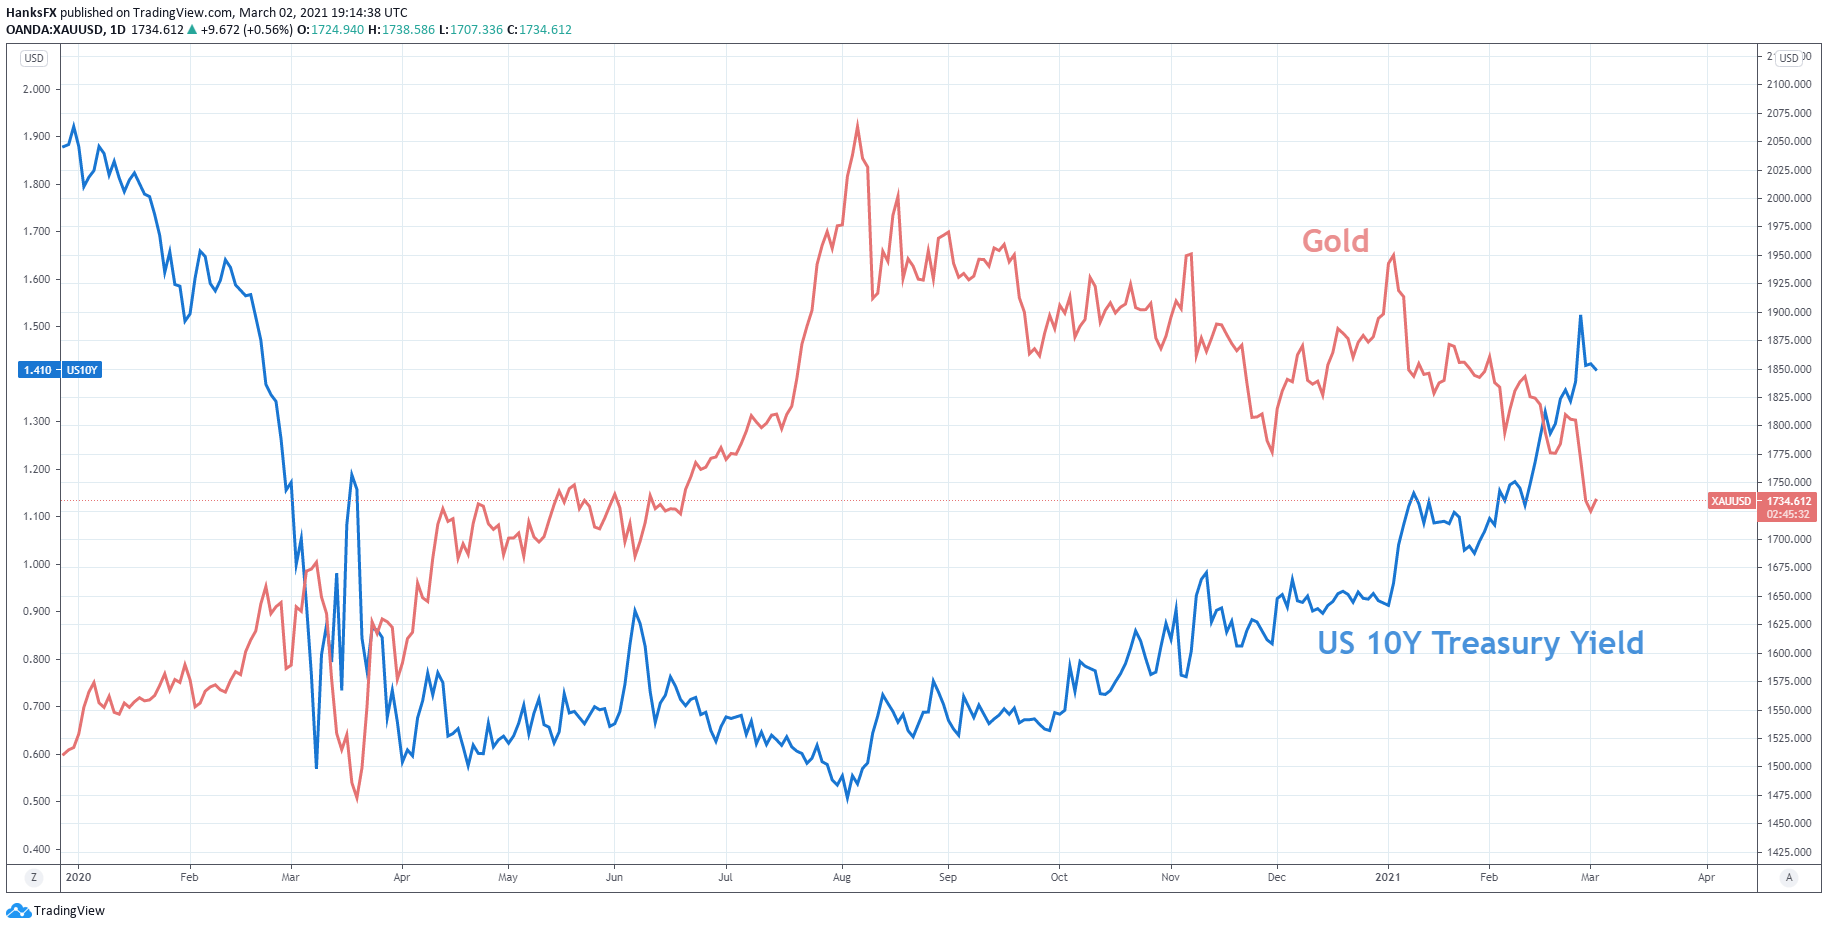 gold pricing charts